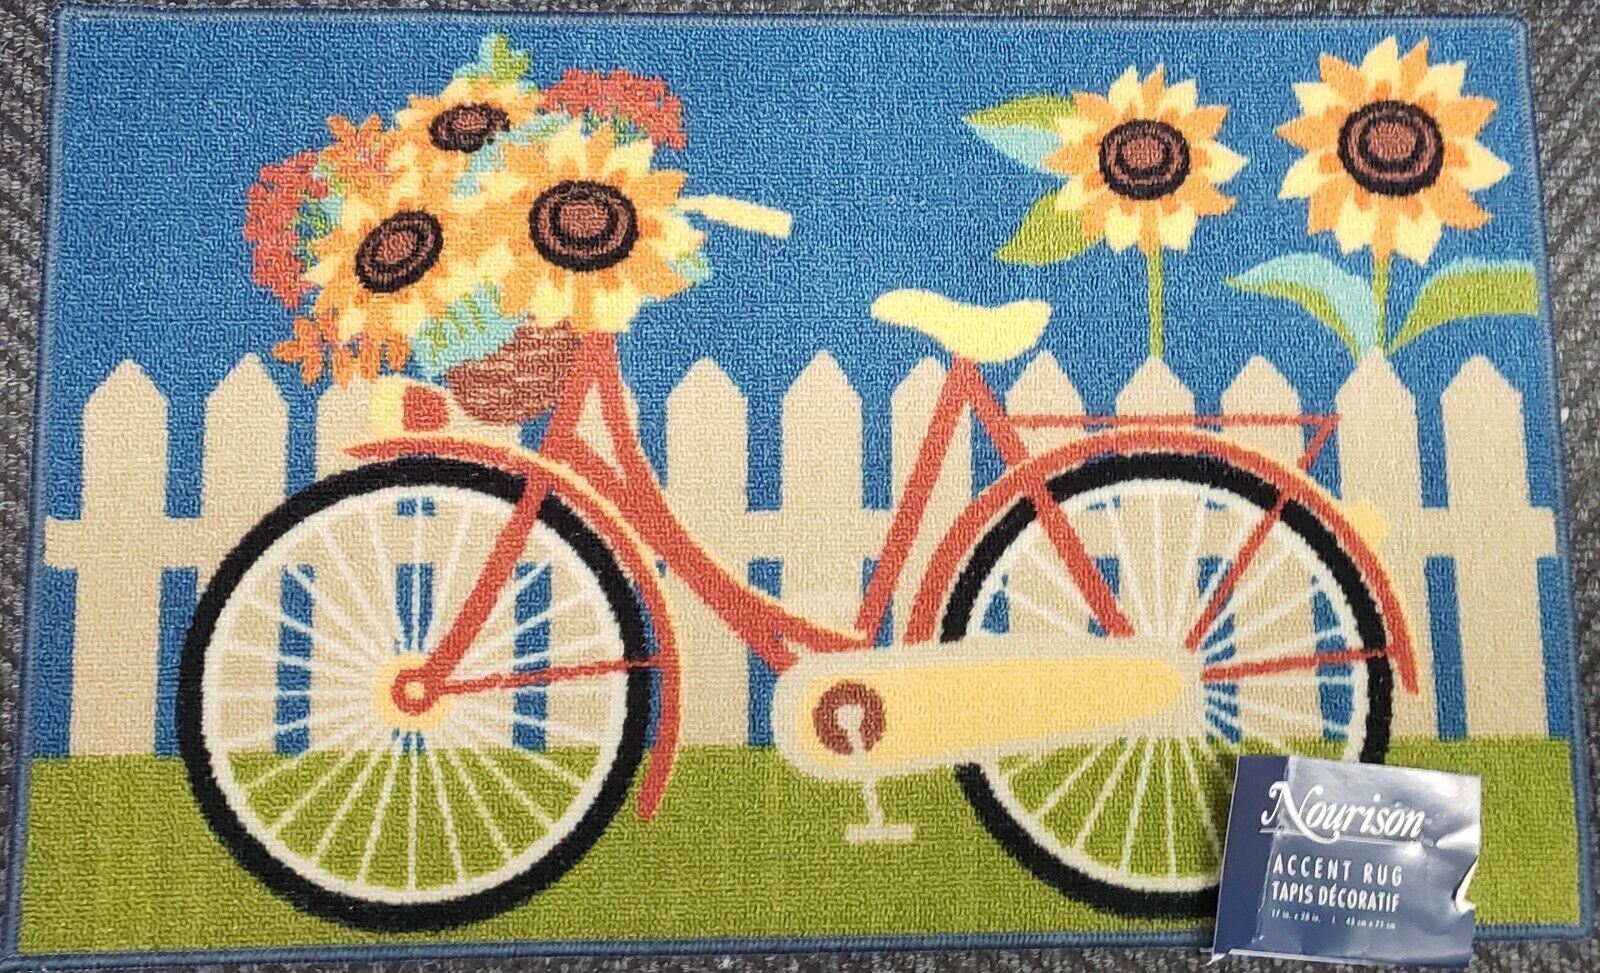 Primary image for KITCHEN ACCENT RUG(nonskid)(17"x28") BICYCLE,BIKE WITH SUNFLOWERS BY THE GATE,NR